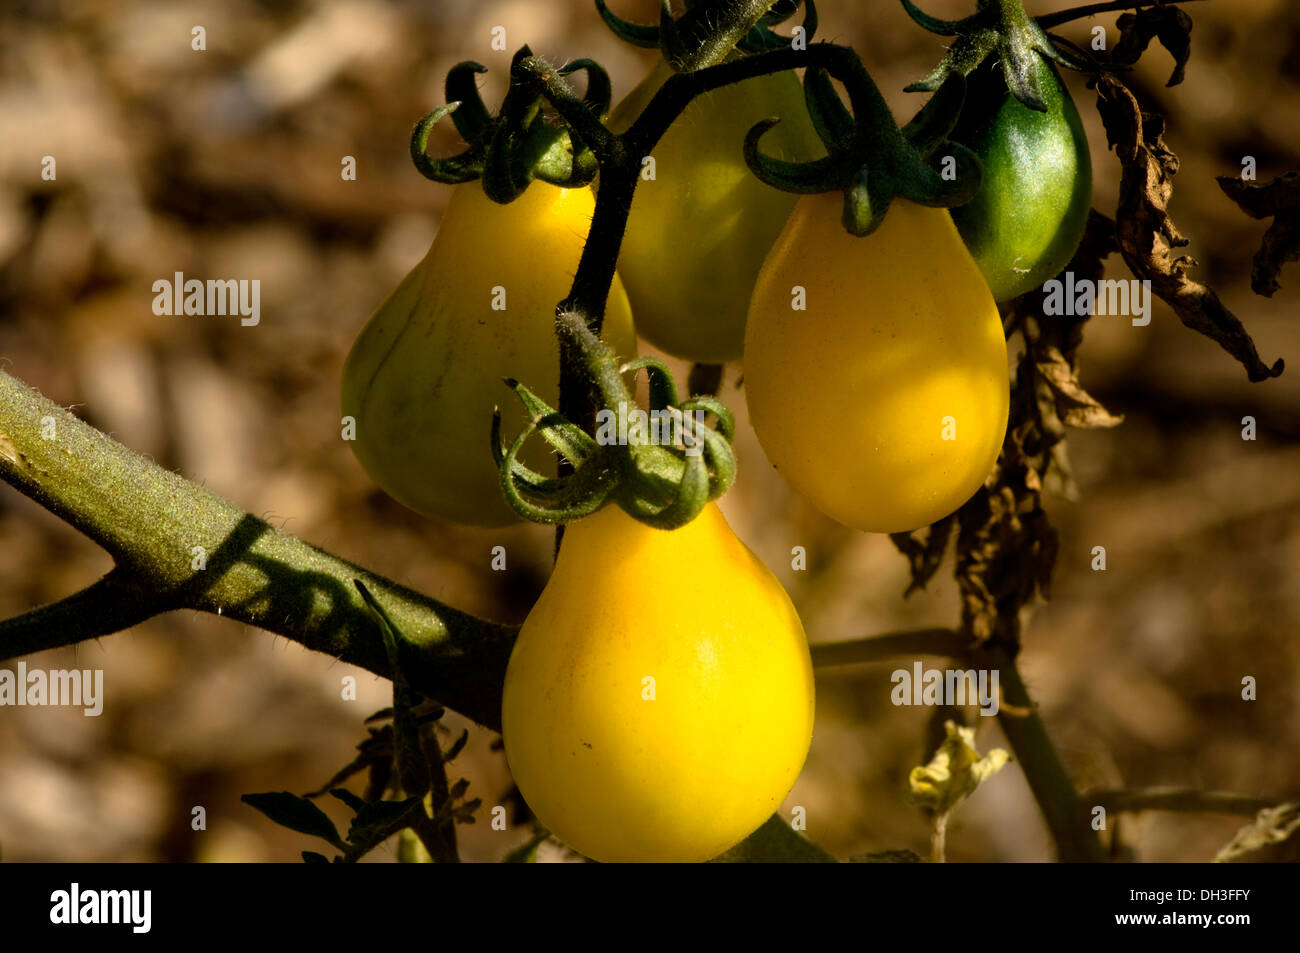 Pear tomatoes growing in an organic garden in Chicago, Illinois, USA. Stock Photo